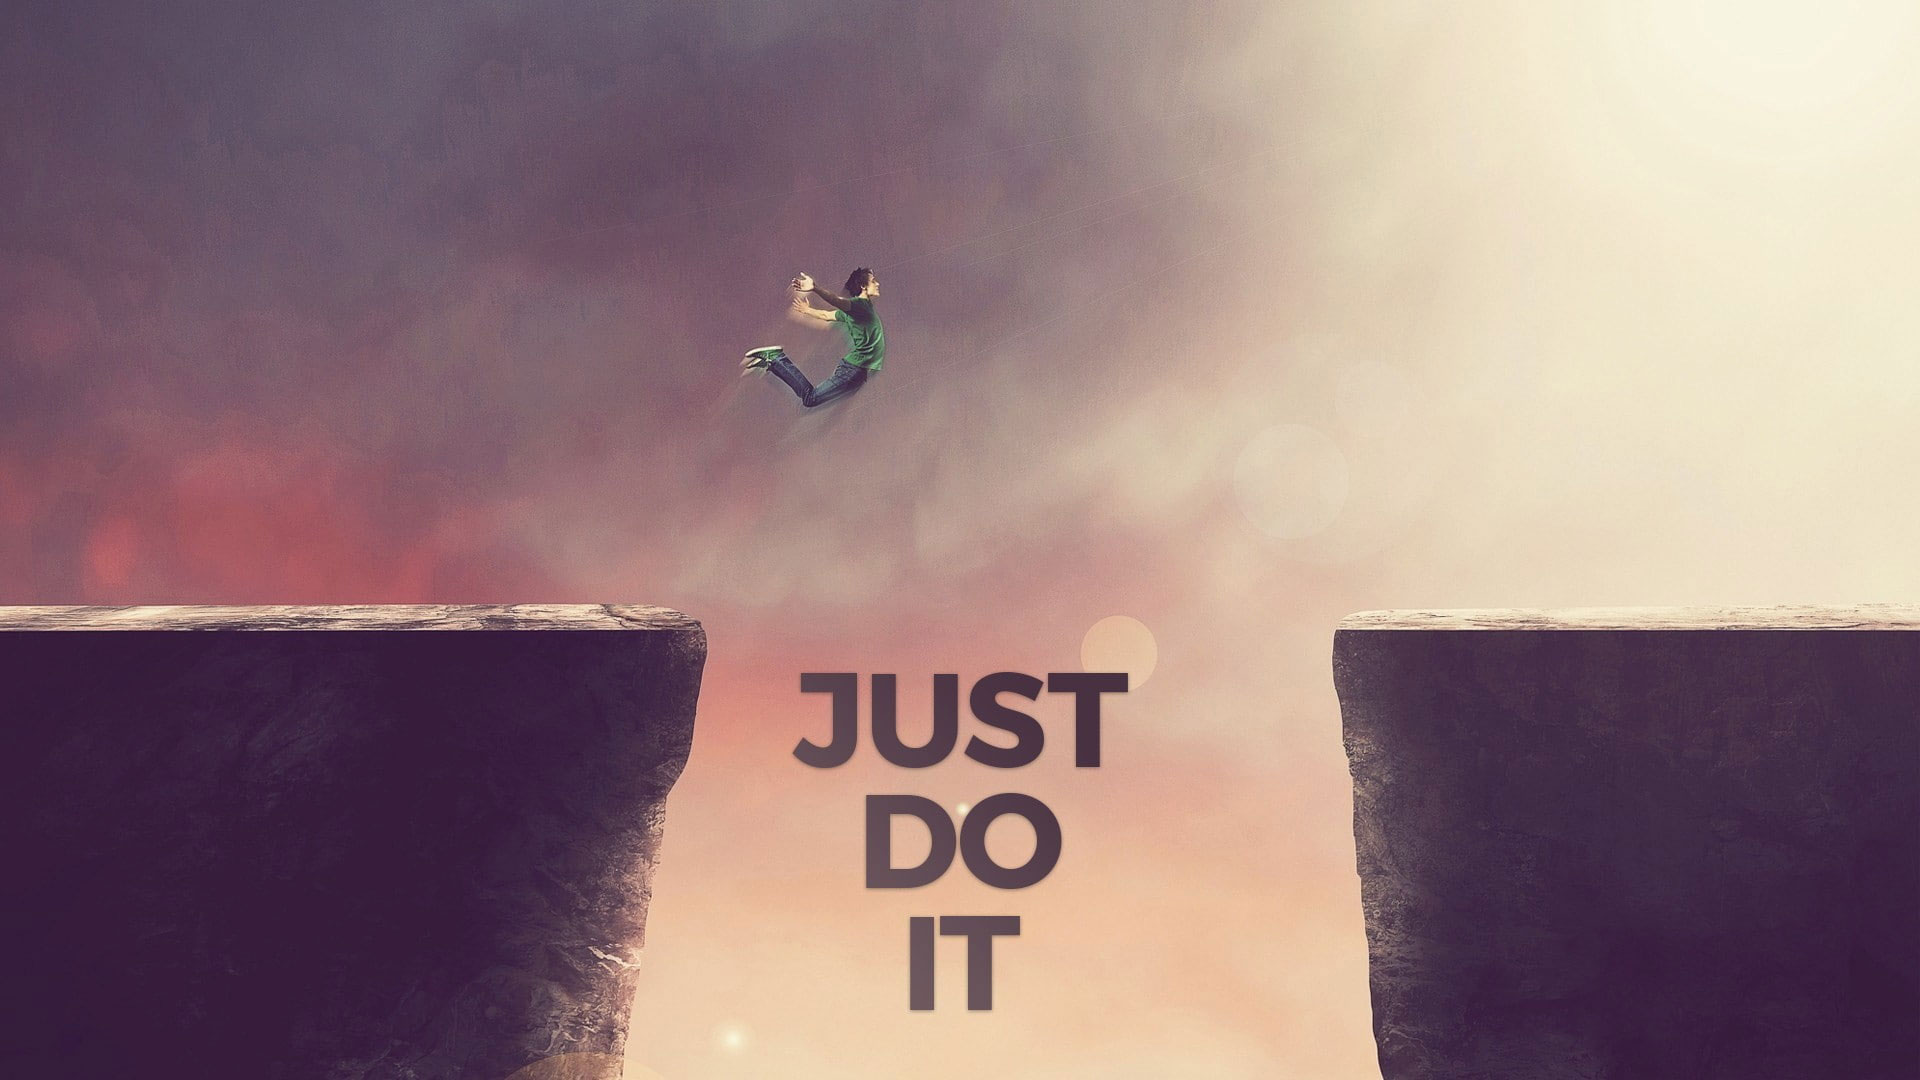 Let's Do It Wallpapers - Wallpaper Cave